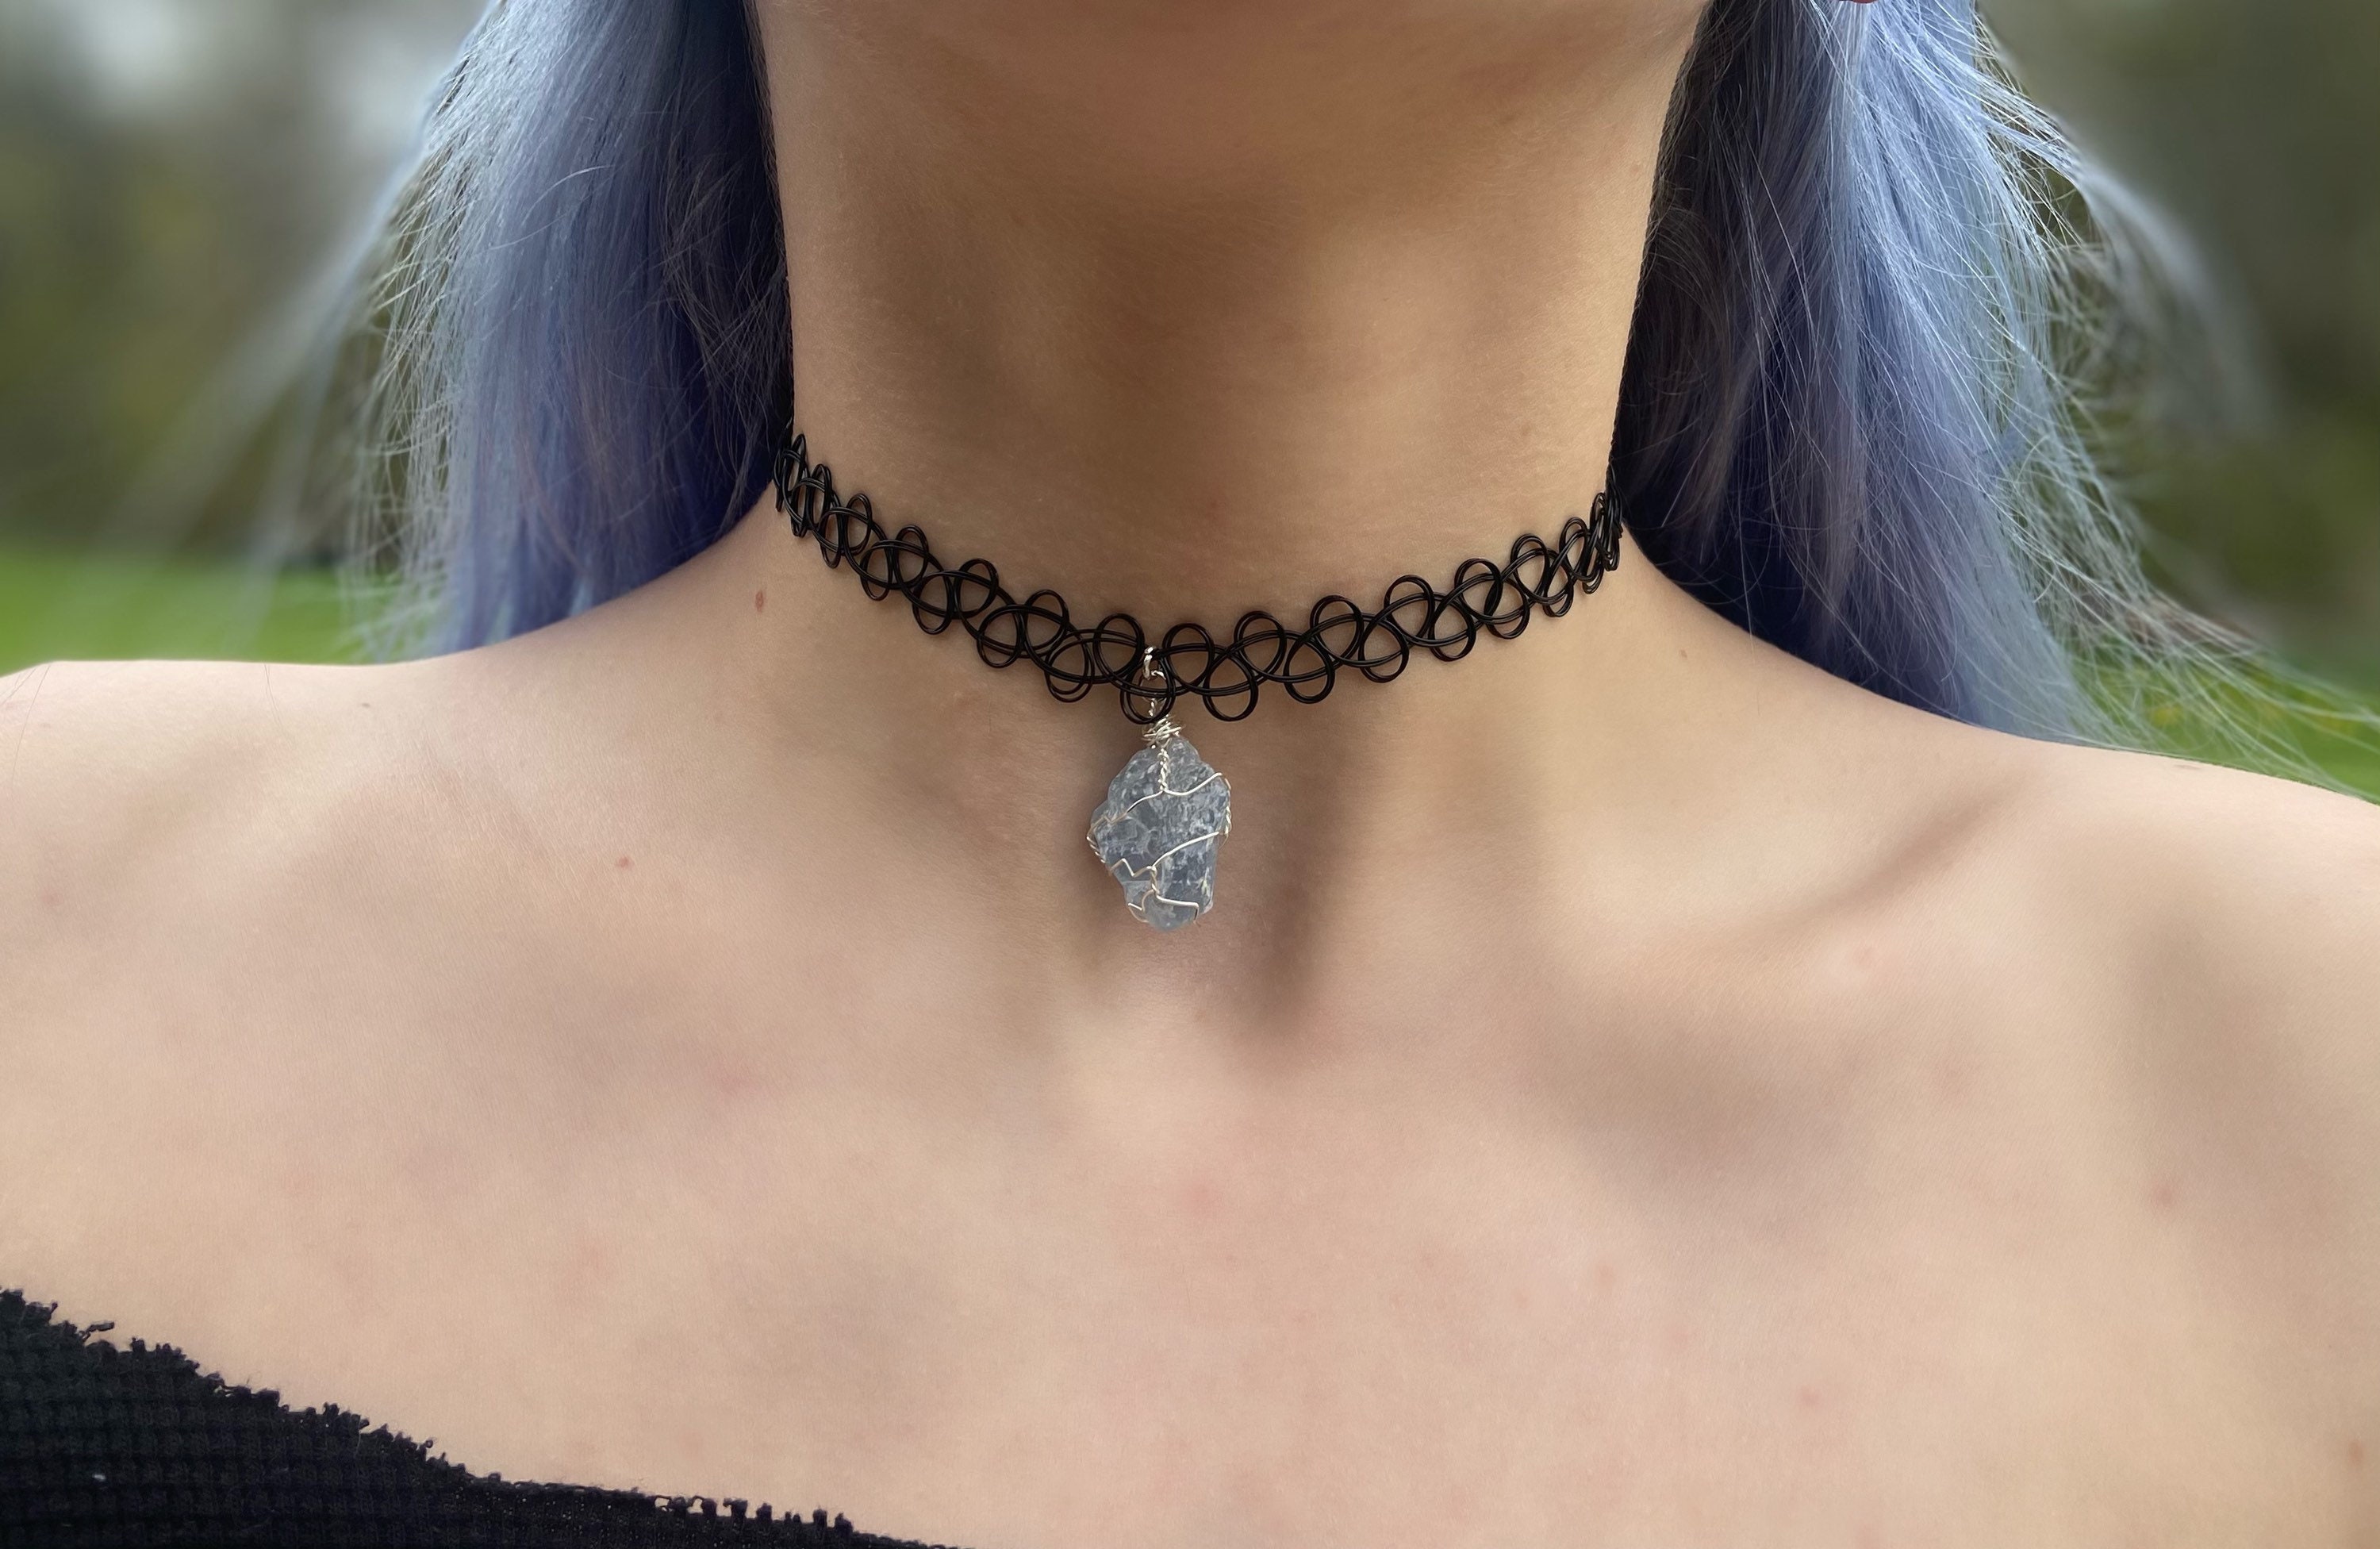 Gothic Choker With Chains, Crocheted Choker With Chains, Obsidian